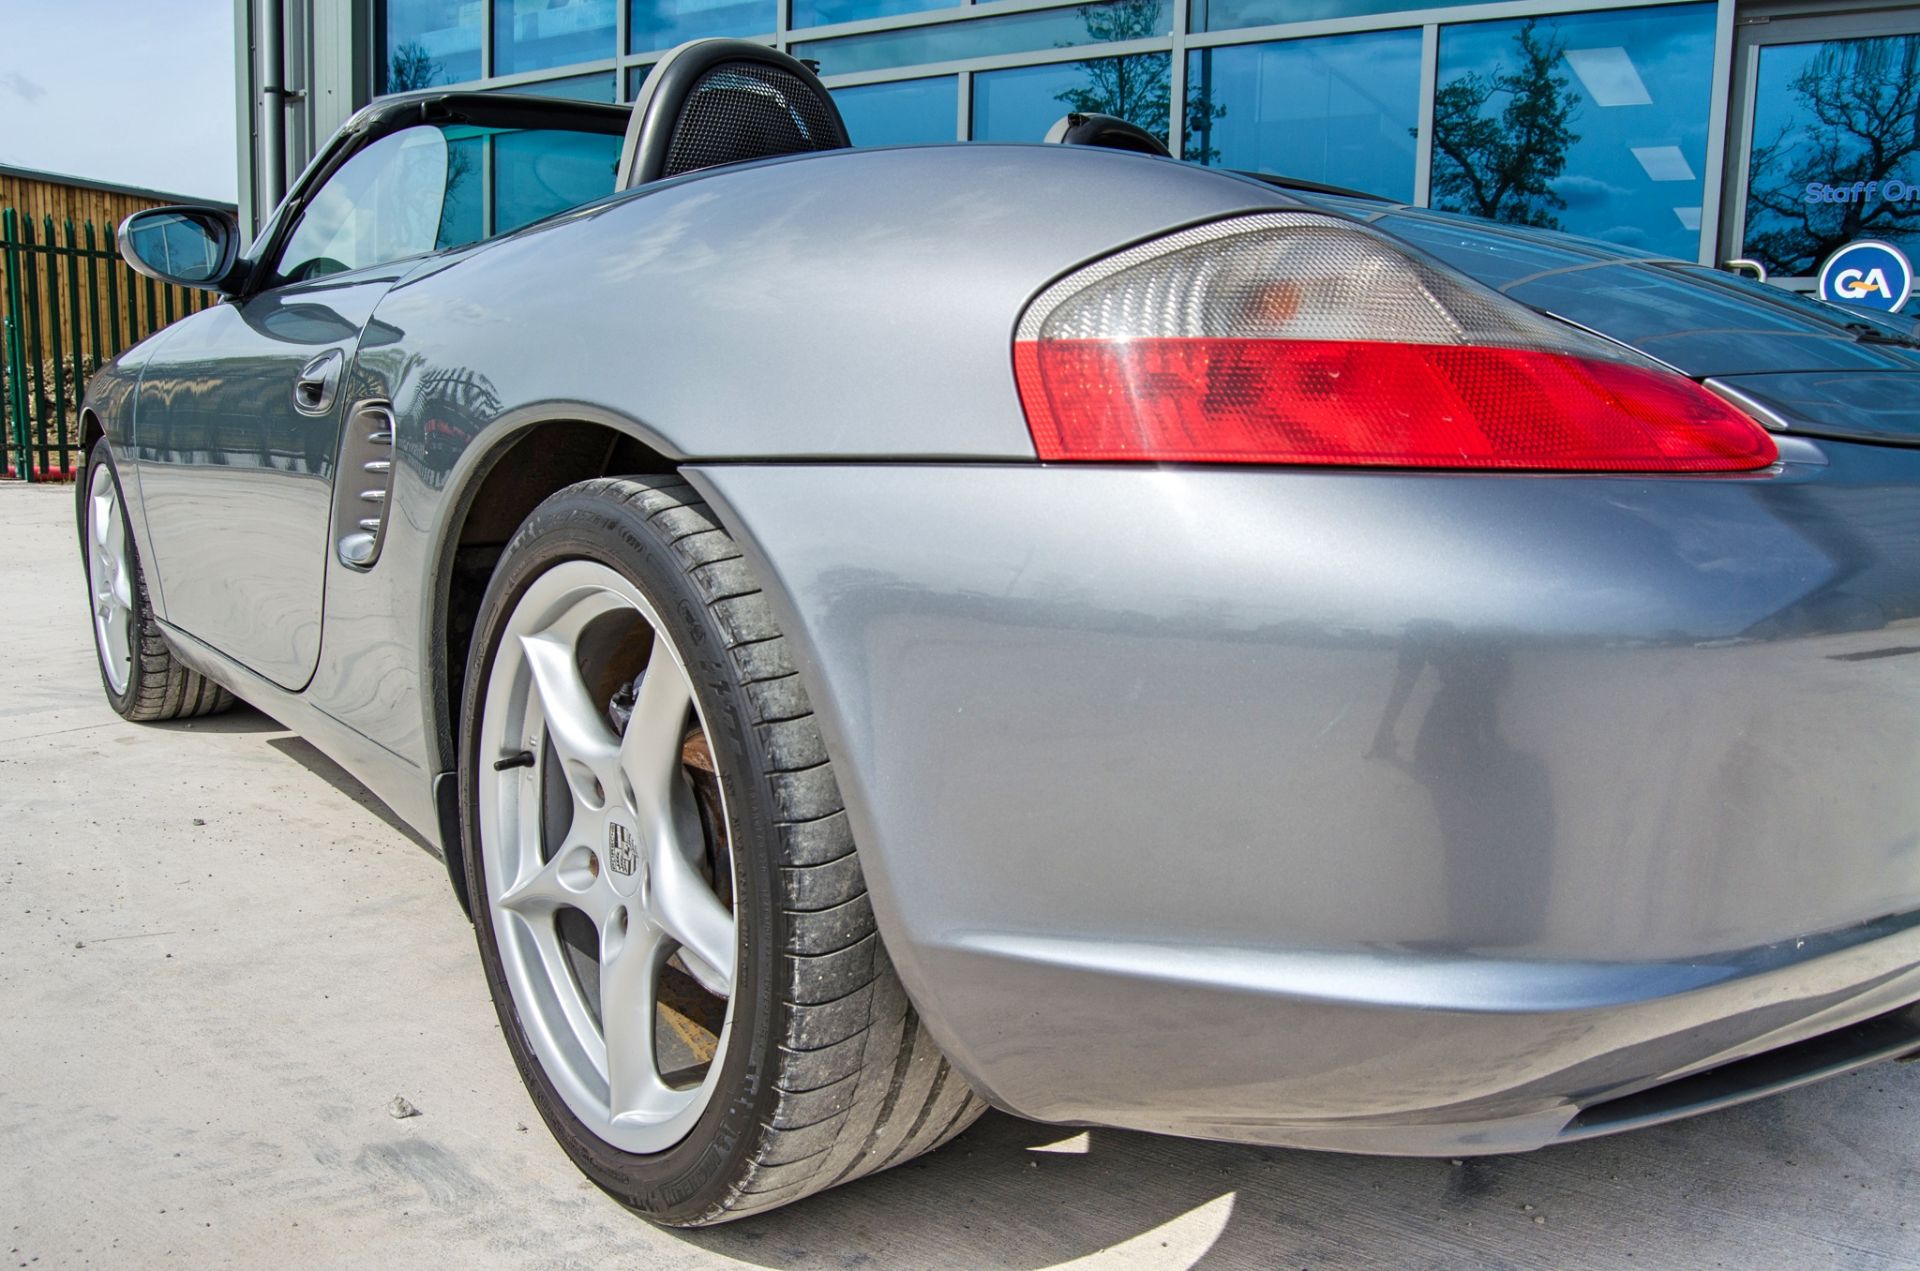 2003 Porsche Boxster 2.7 5 speed manual convertible roadster - Image 23 of 50